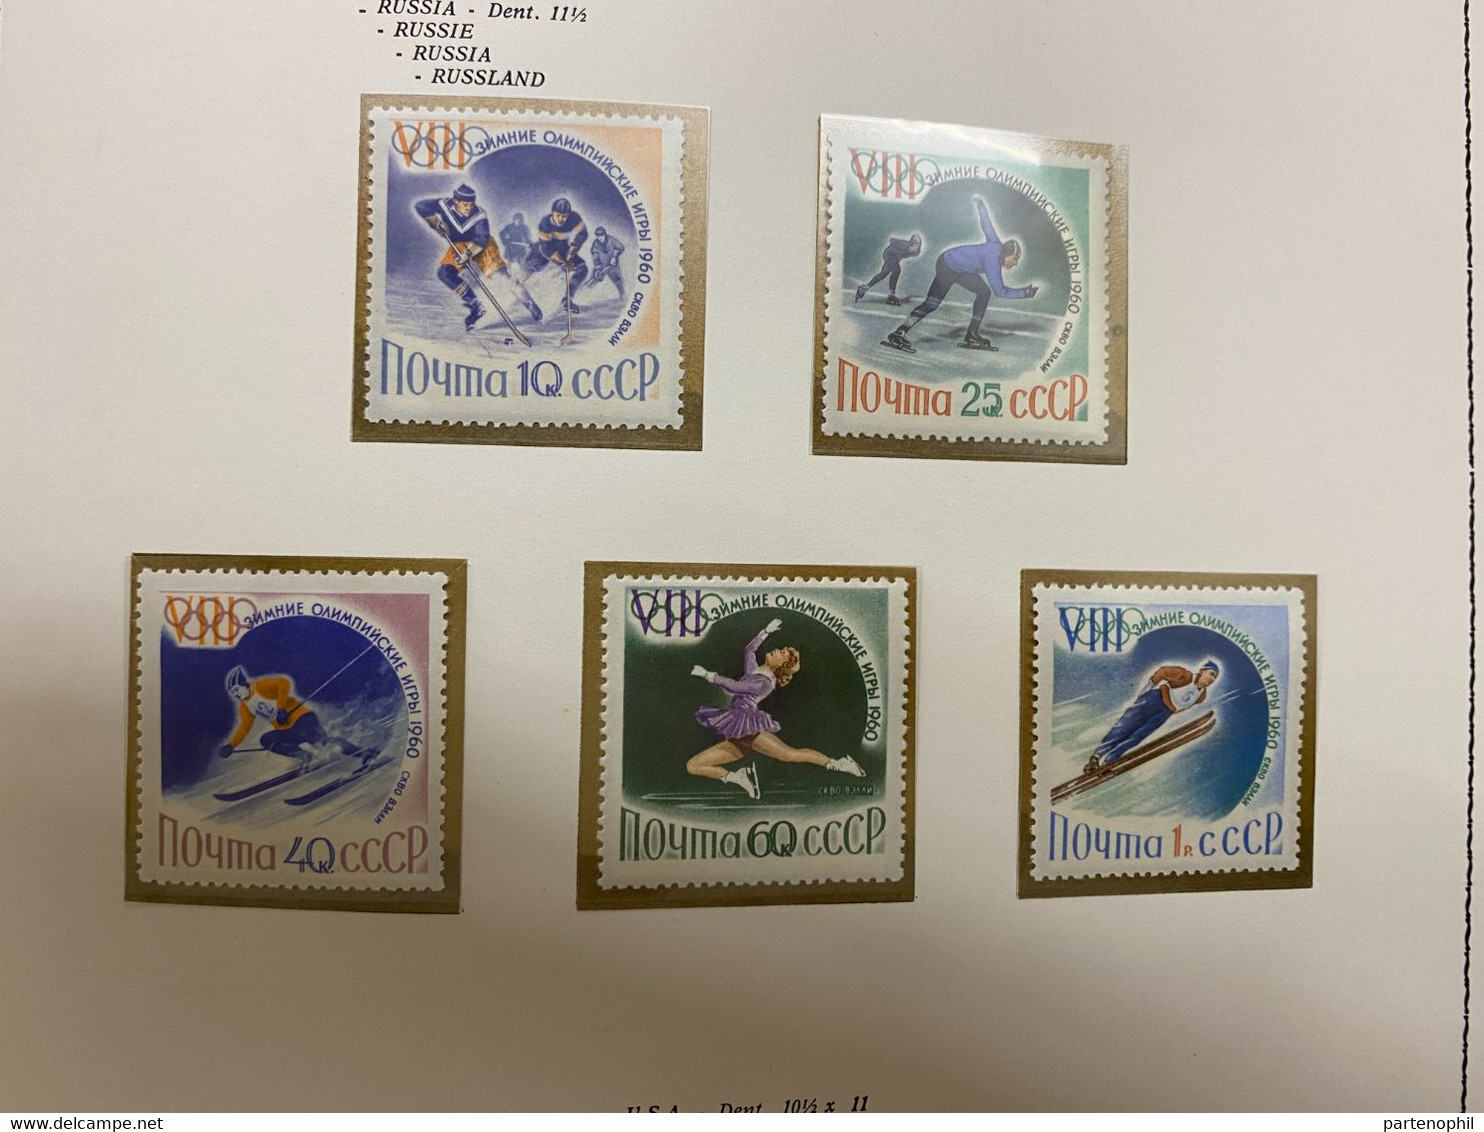 Russia - Squaw Valley 1960 - Winter Olimpic Games / Sports / Giochi Olimpici - Set MNH - Hiver 1960: Squaw Valley